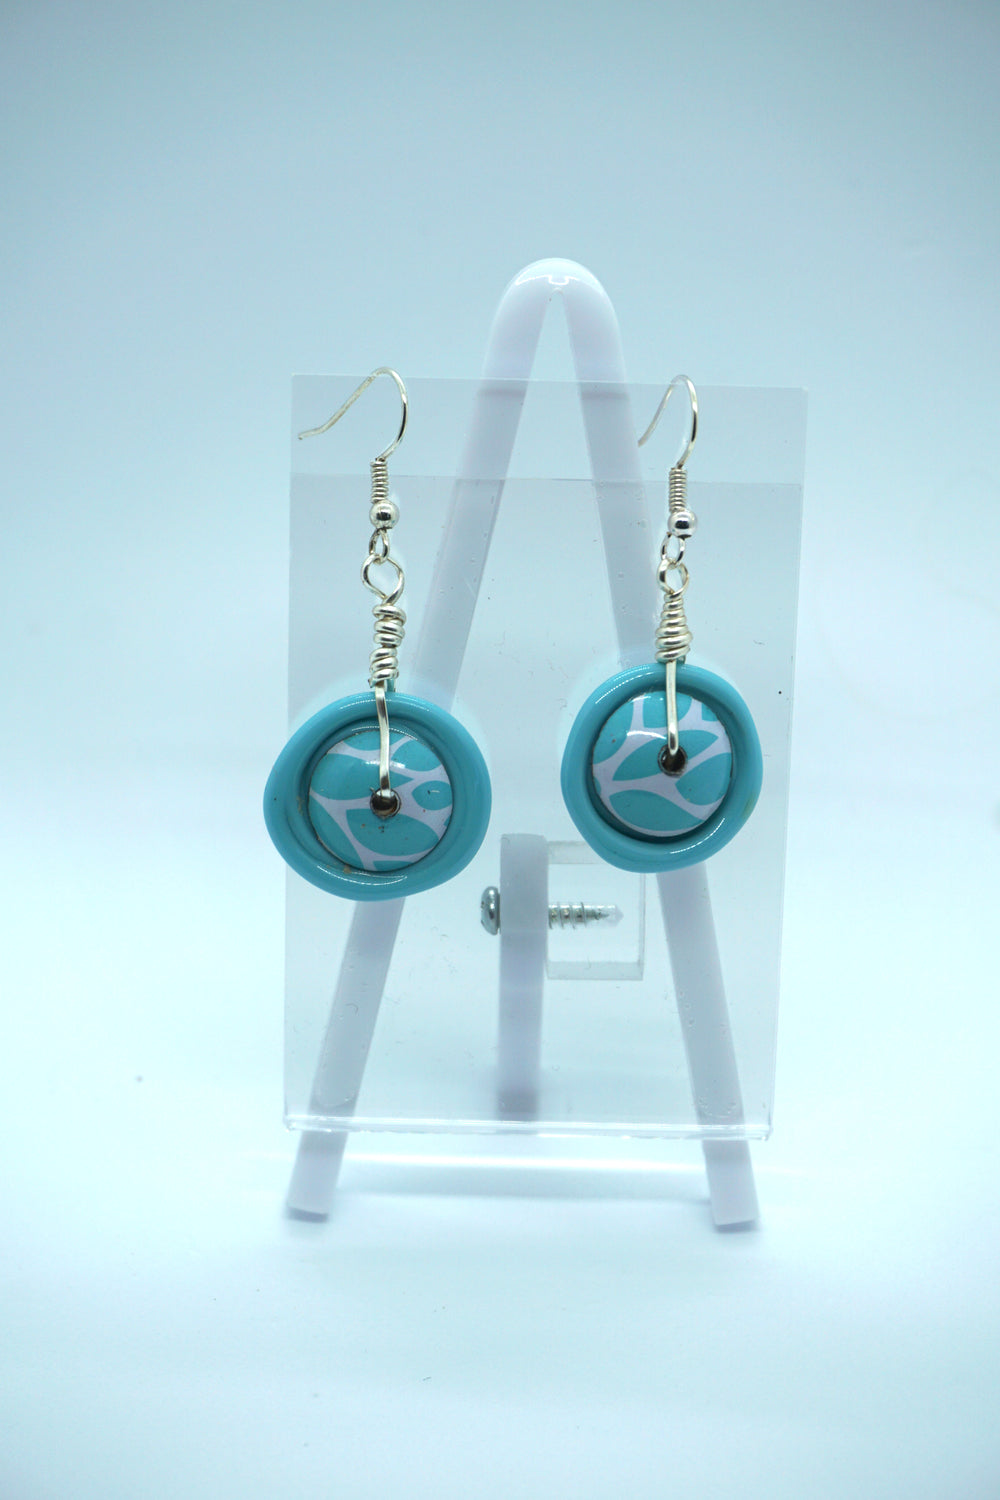 Lampwork glass bead earrings in blue and white with tin